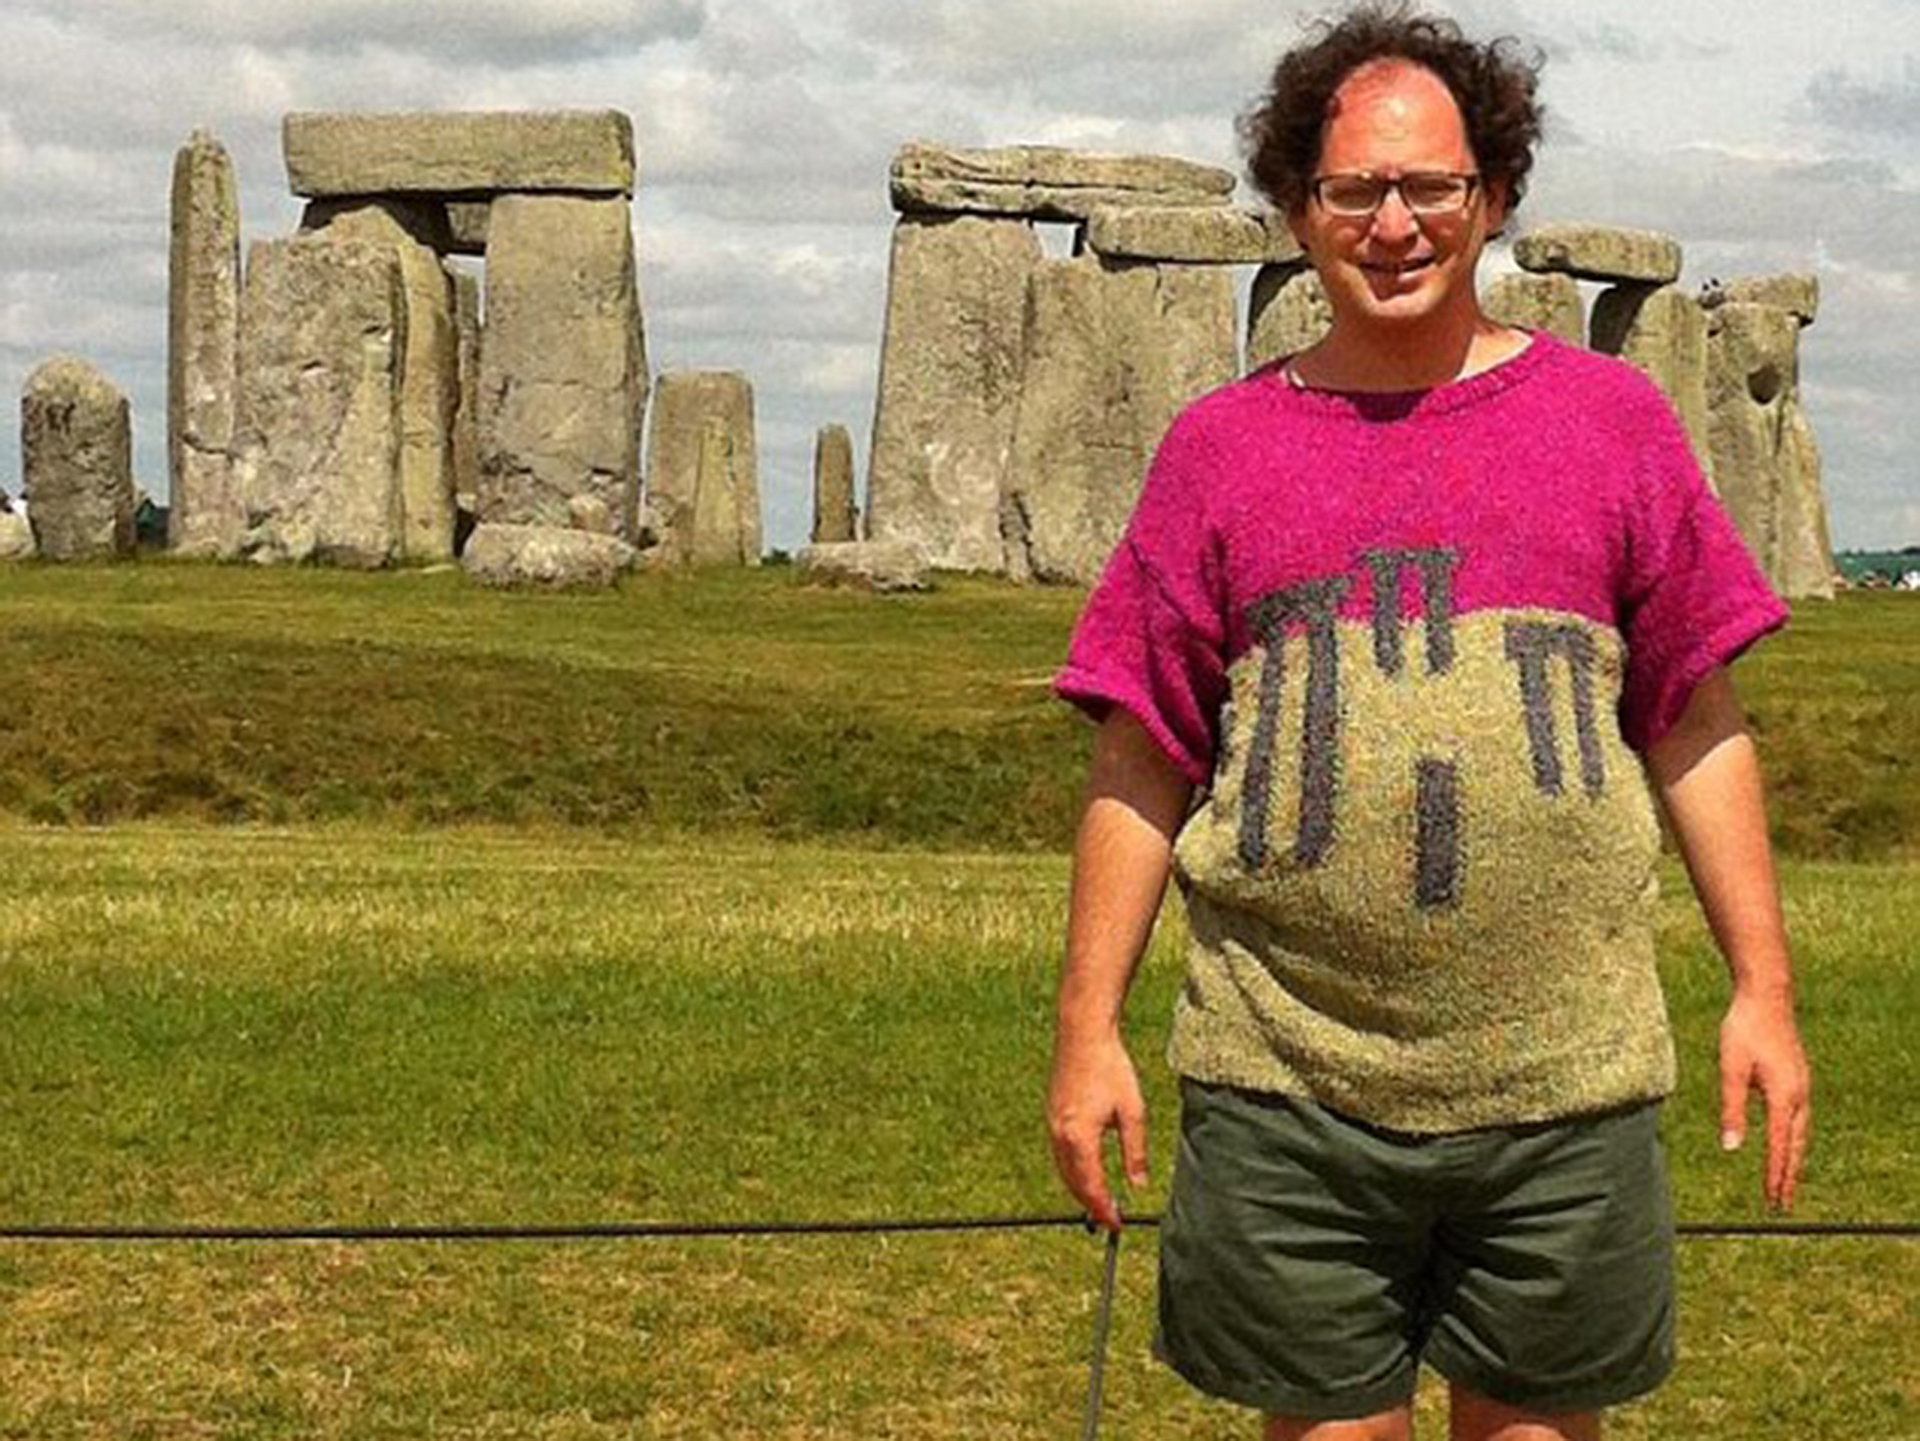 Man knits jumpers of the destinations he travels to